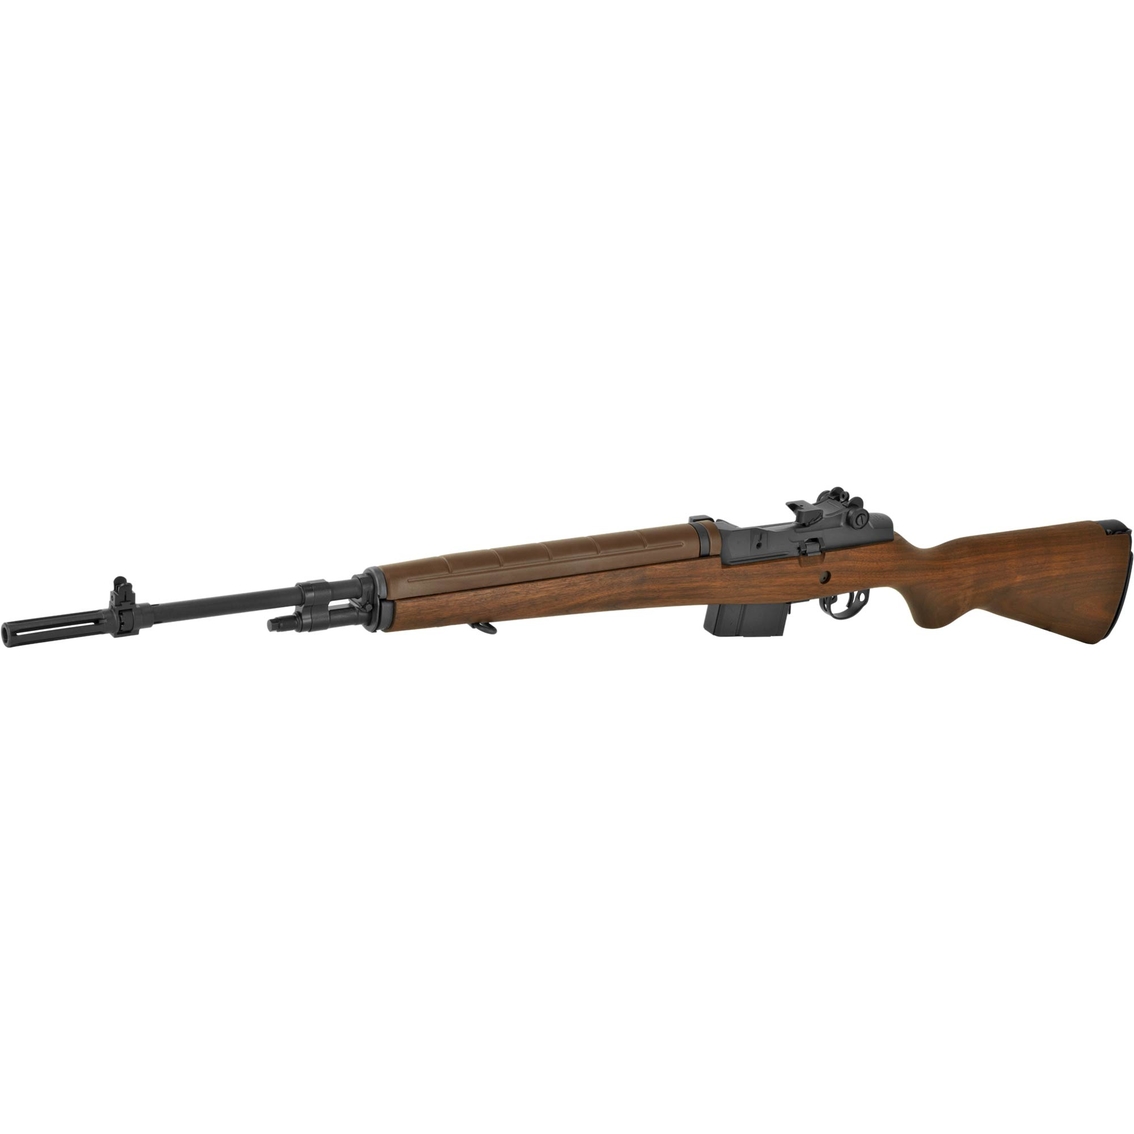 Springfield M1A Standard 308 Win 22 in. Barrel 10 Rnd Rifle Blued - Image 3 of 3